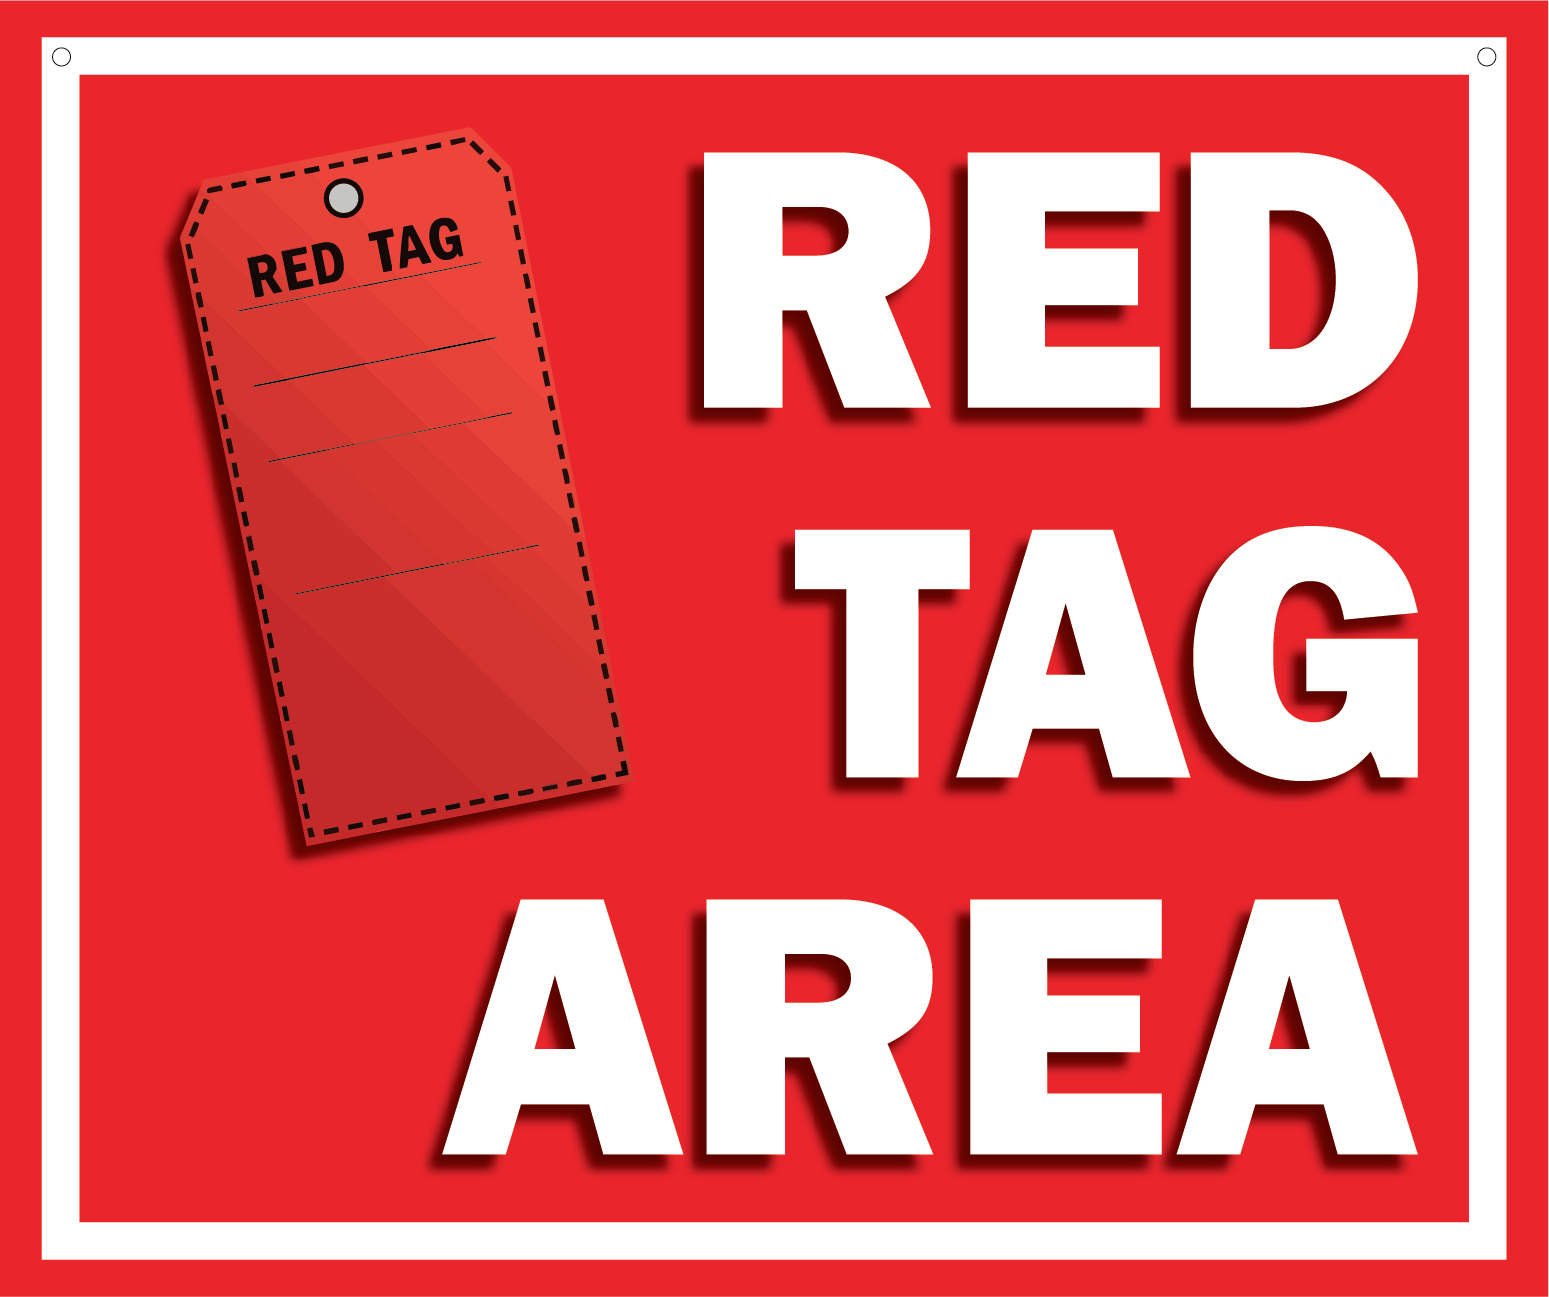 Red Tag Area Floor Sign V3 (22 x 18)